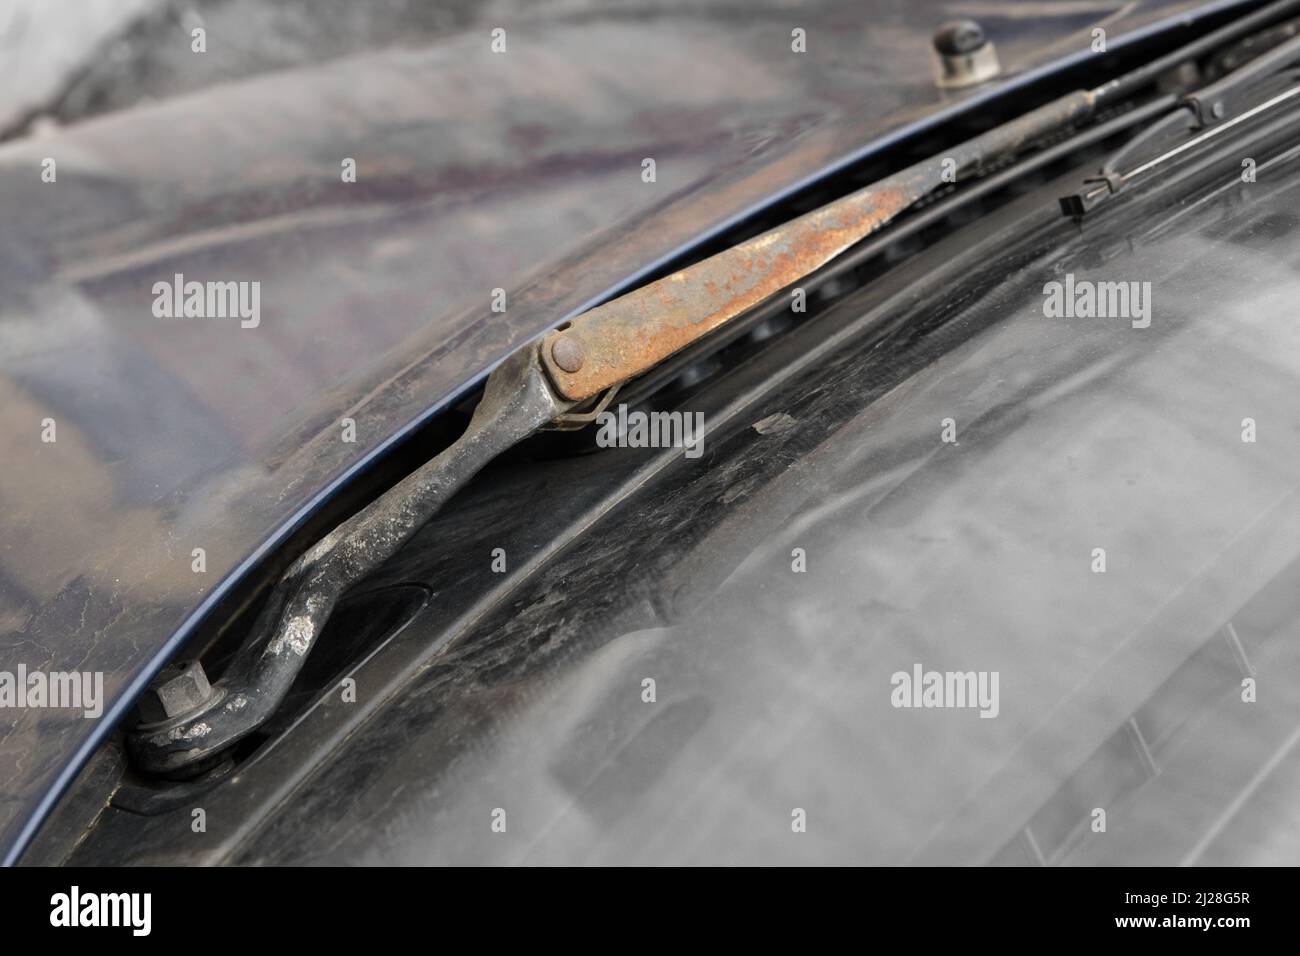 Old rusty non-working car windshield wipers, close-up, wear and tear of transport parts. Stock Photo